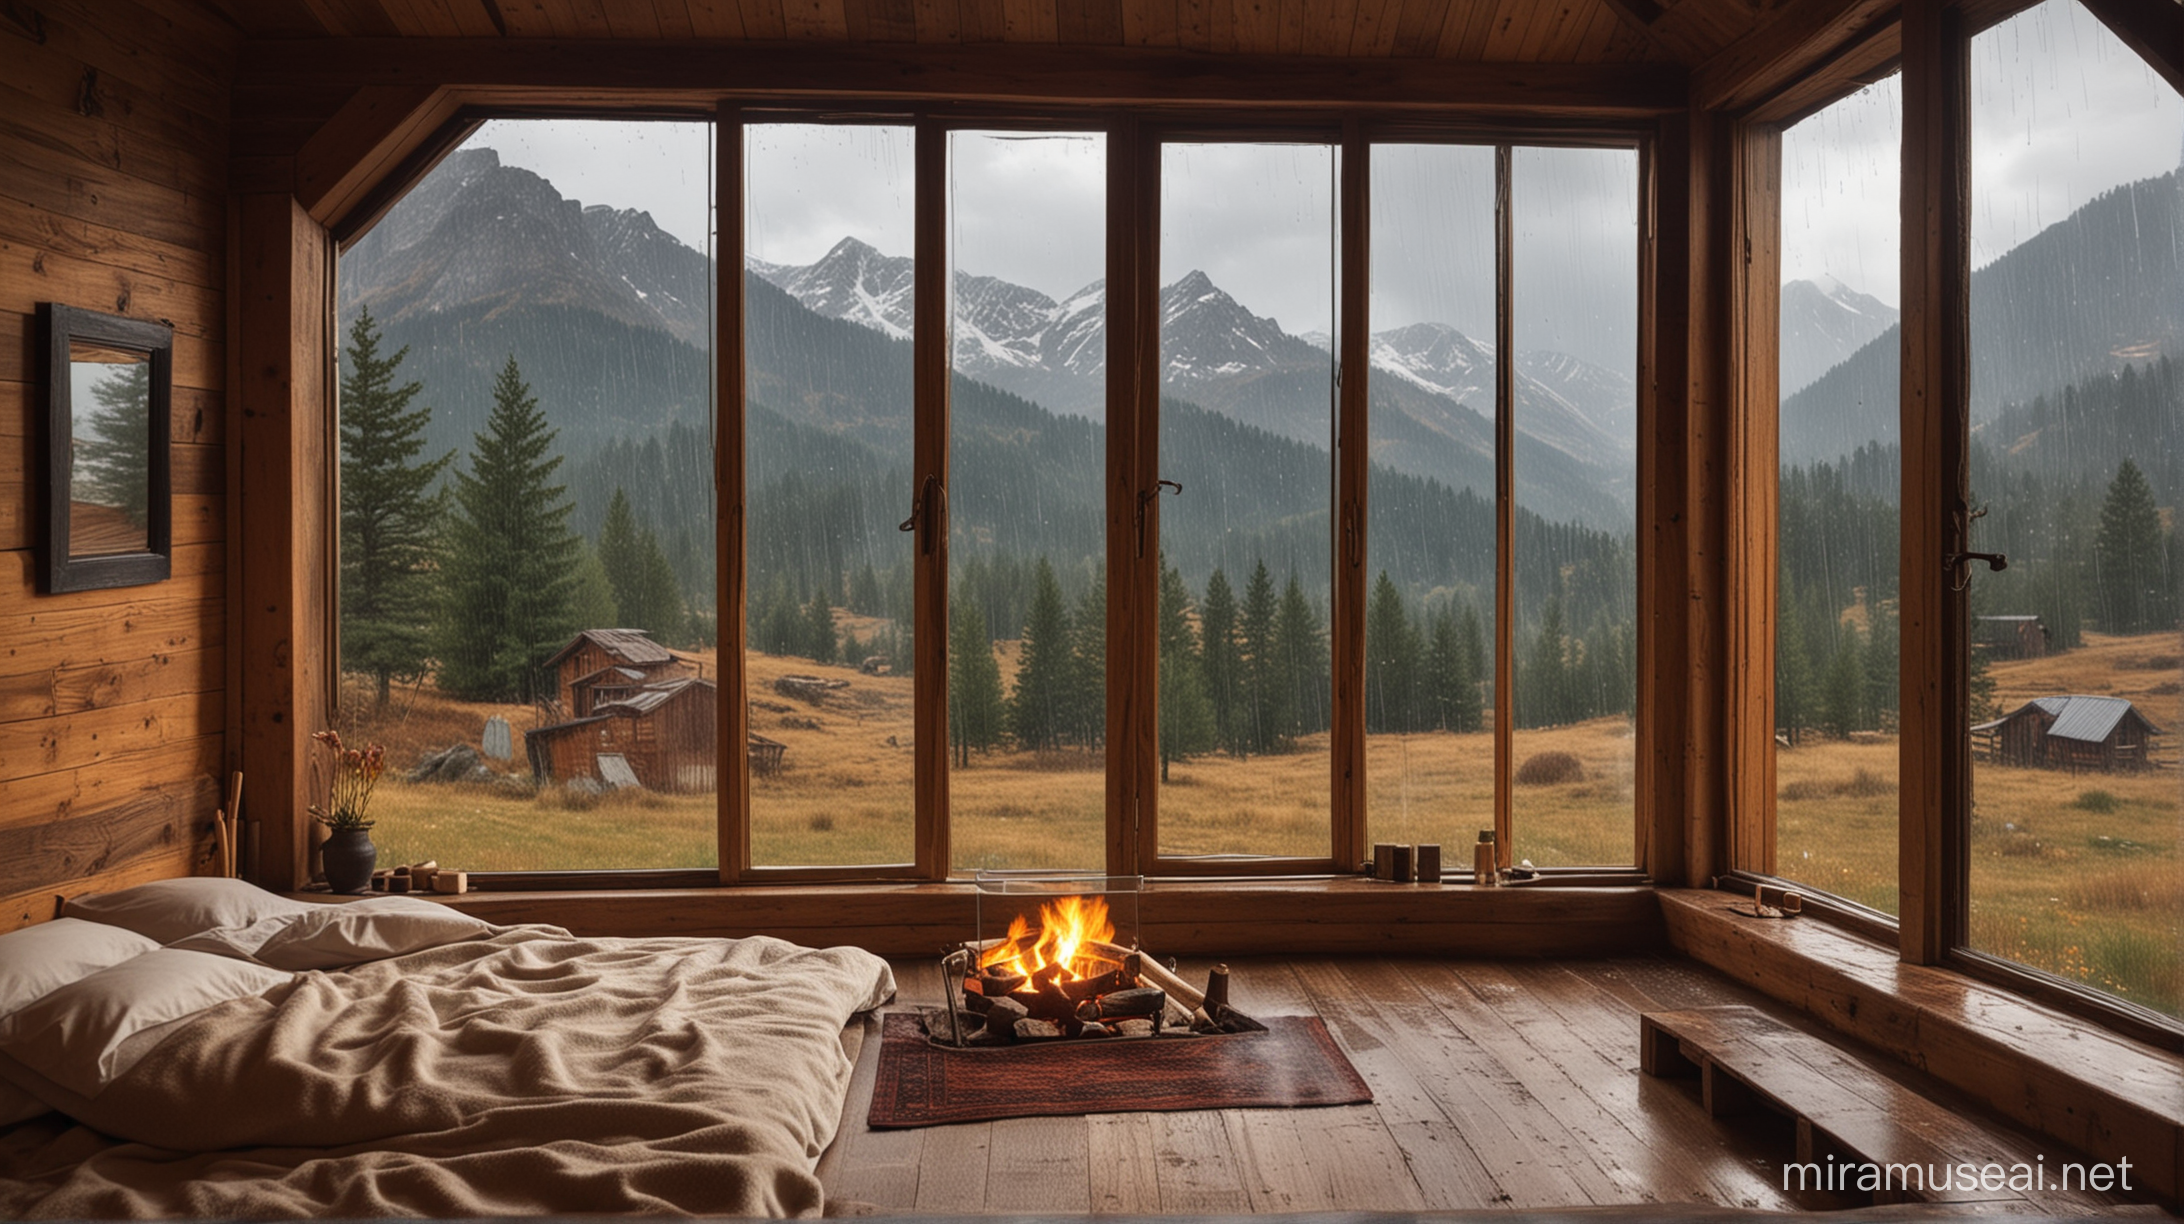 Wooden Room with Mountain Valley view - Rain on window, crackling fireplace for Sleeping, Relaxing